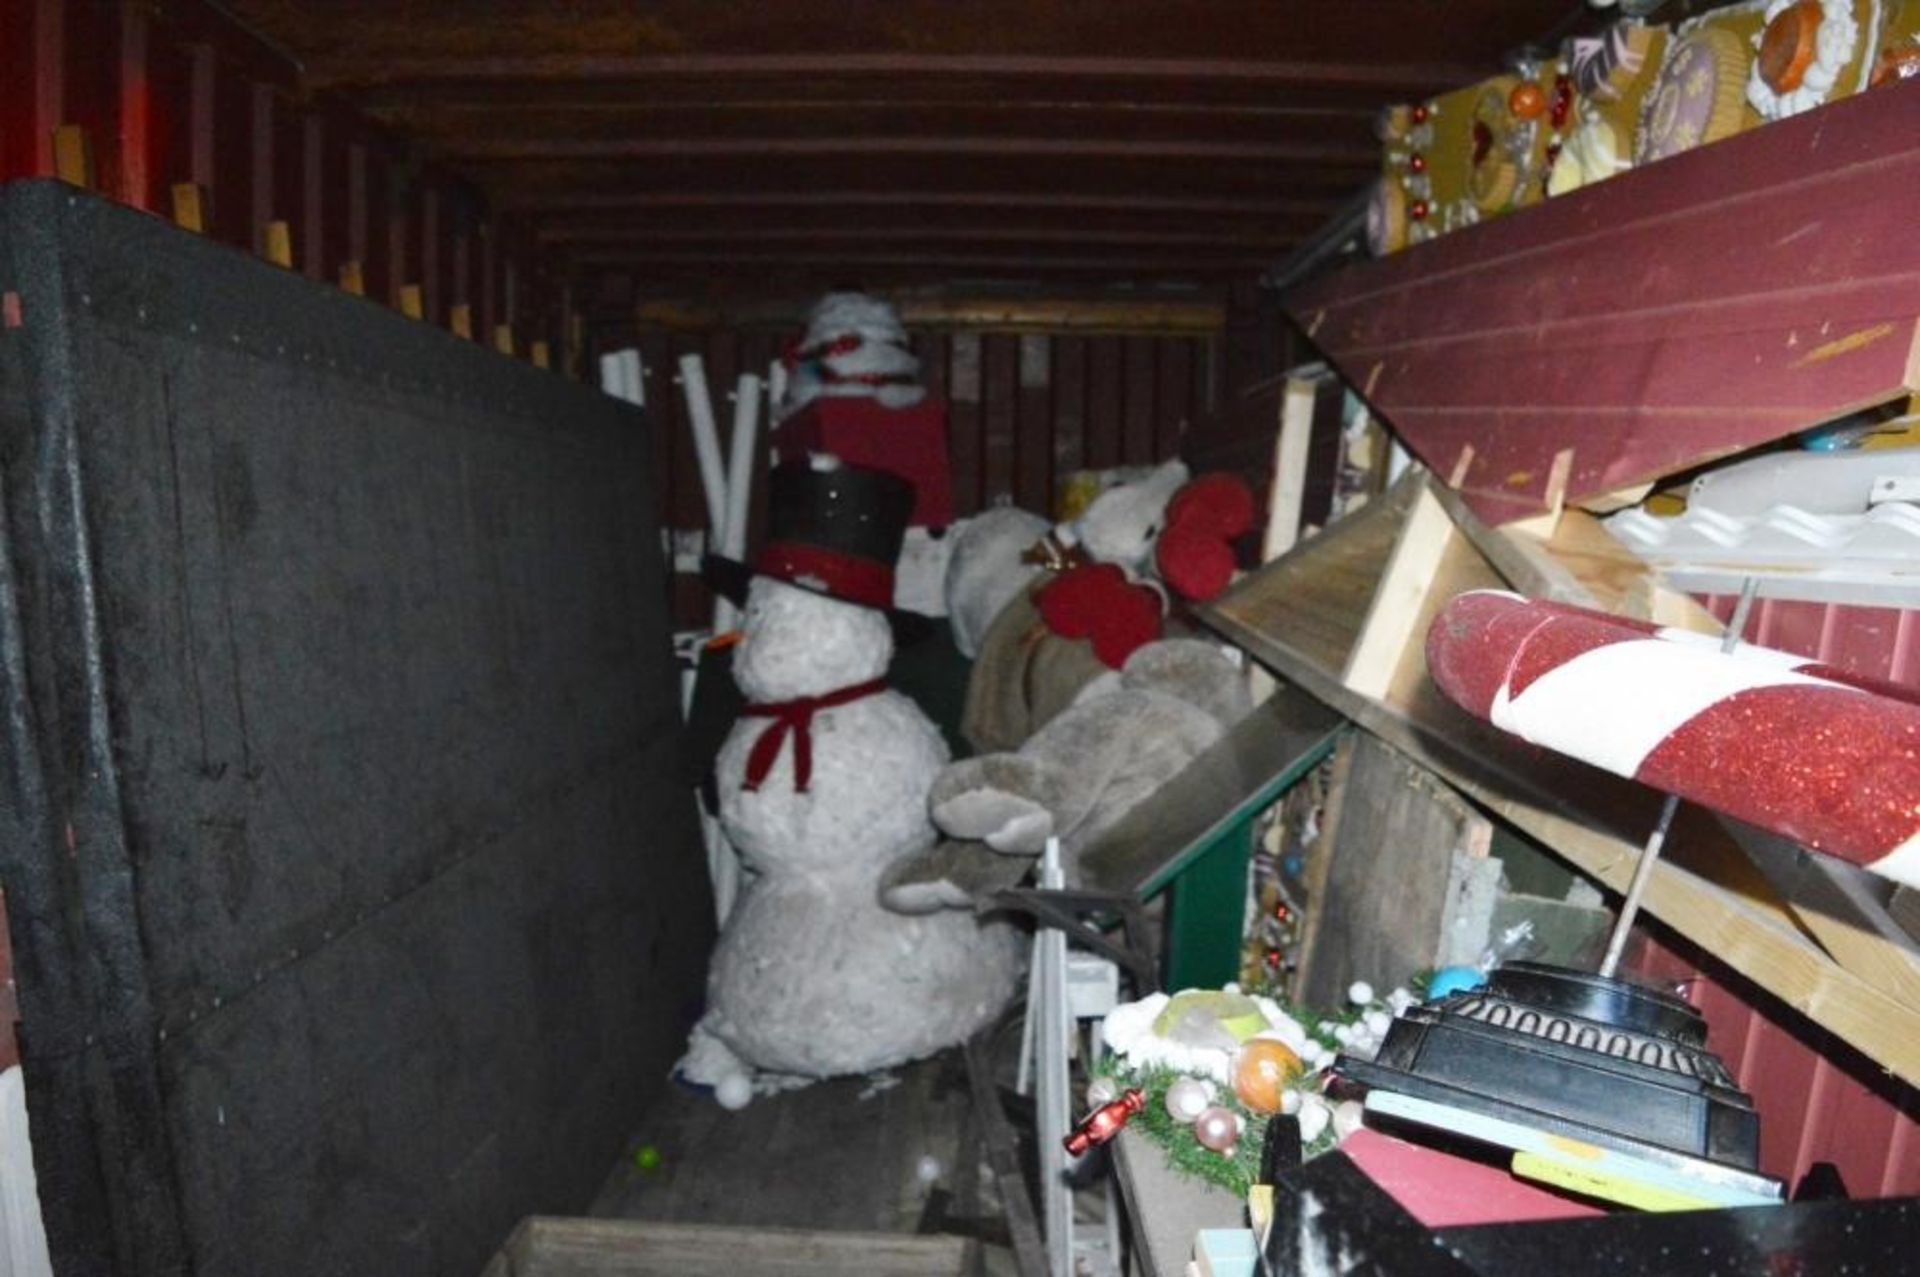 1 x Botany Bay Santas Grotto - Contents of Storage Container to Include Santas Grotto and Accessorie - Image 3 of 20